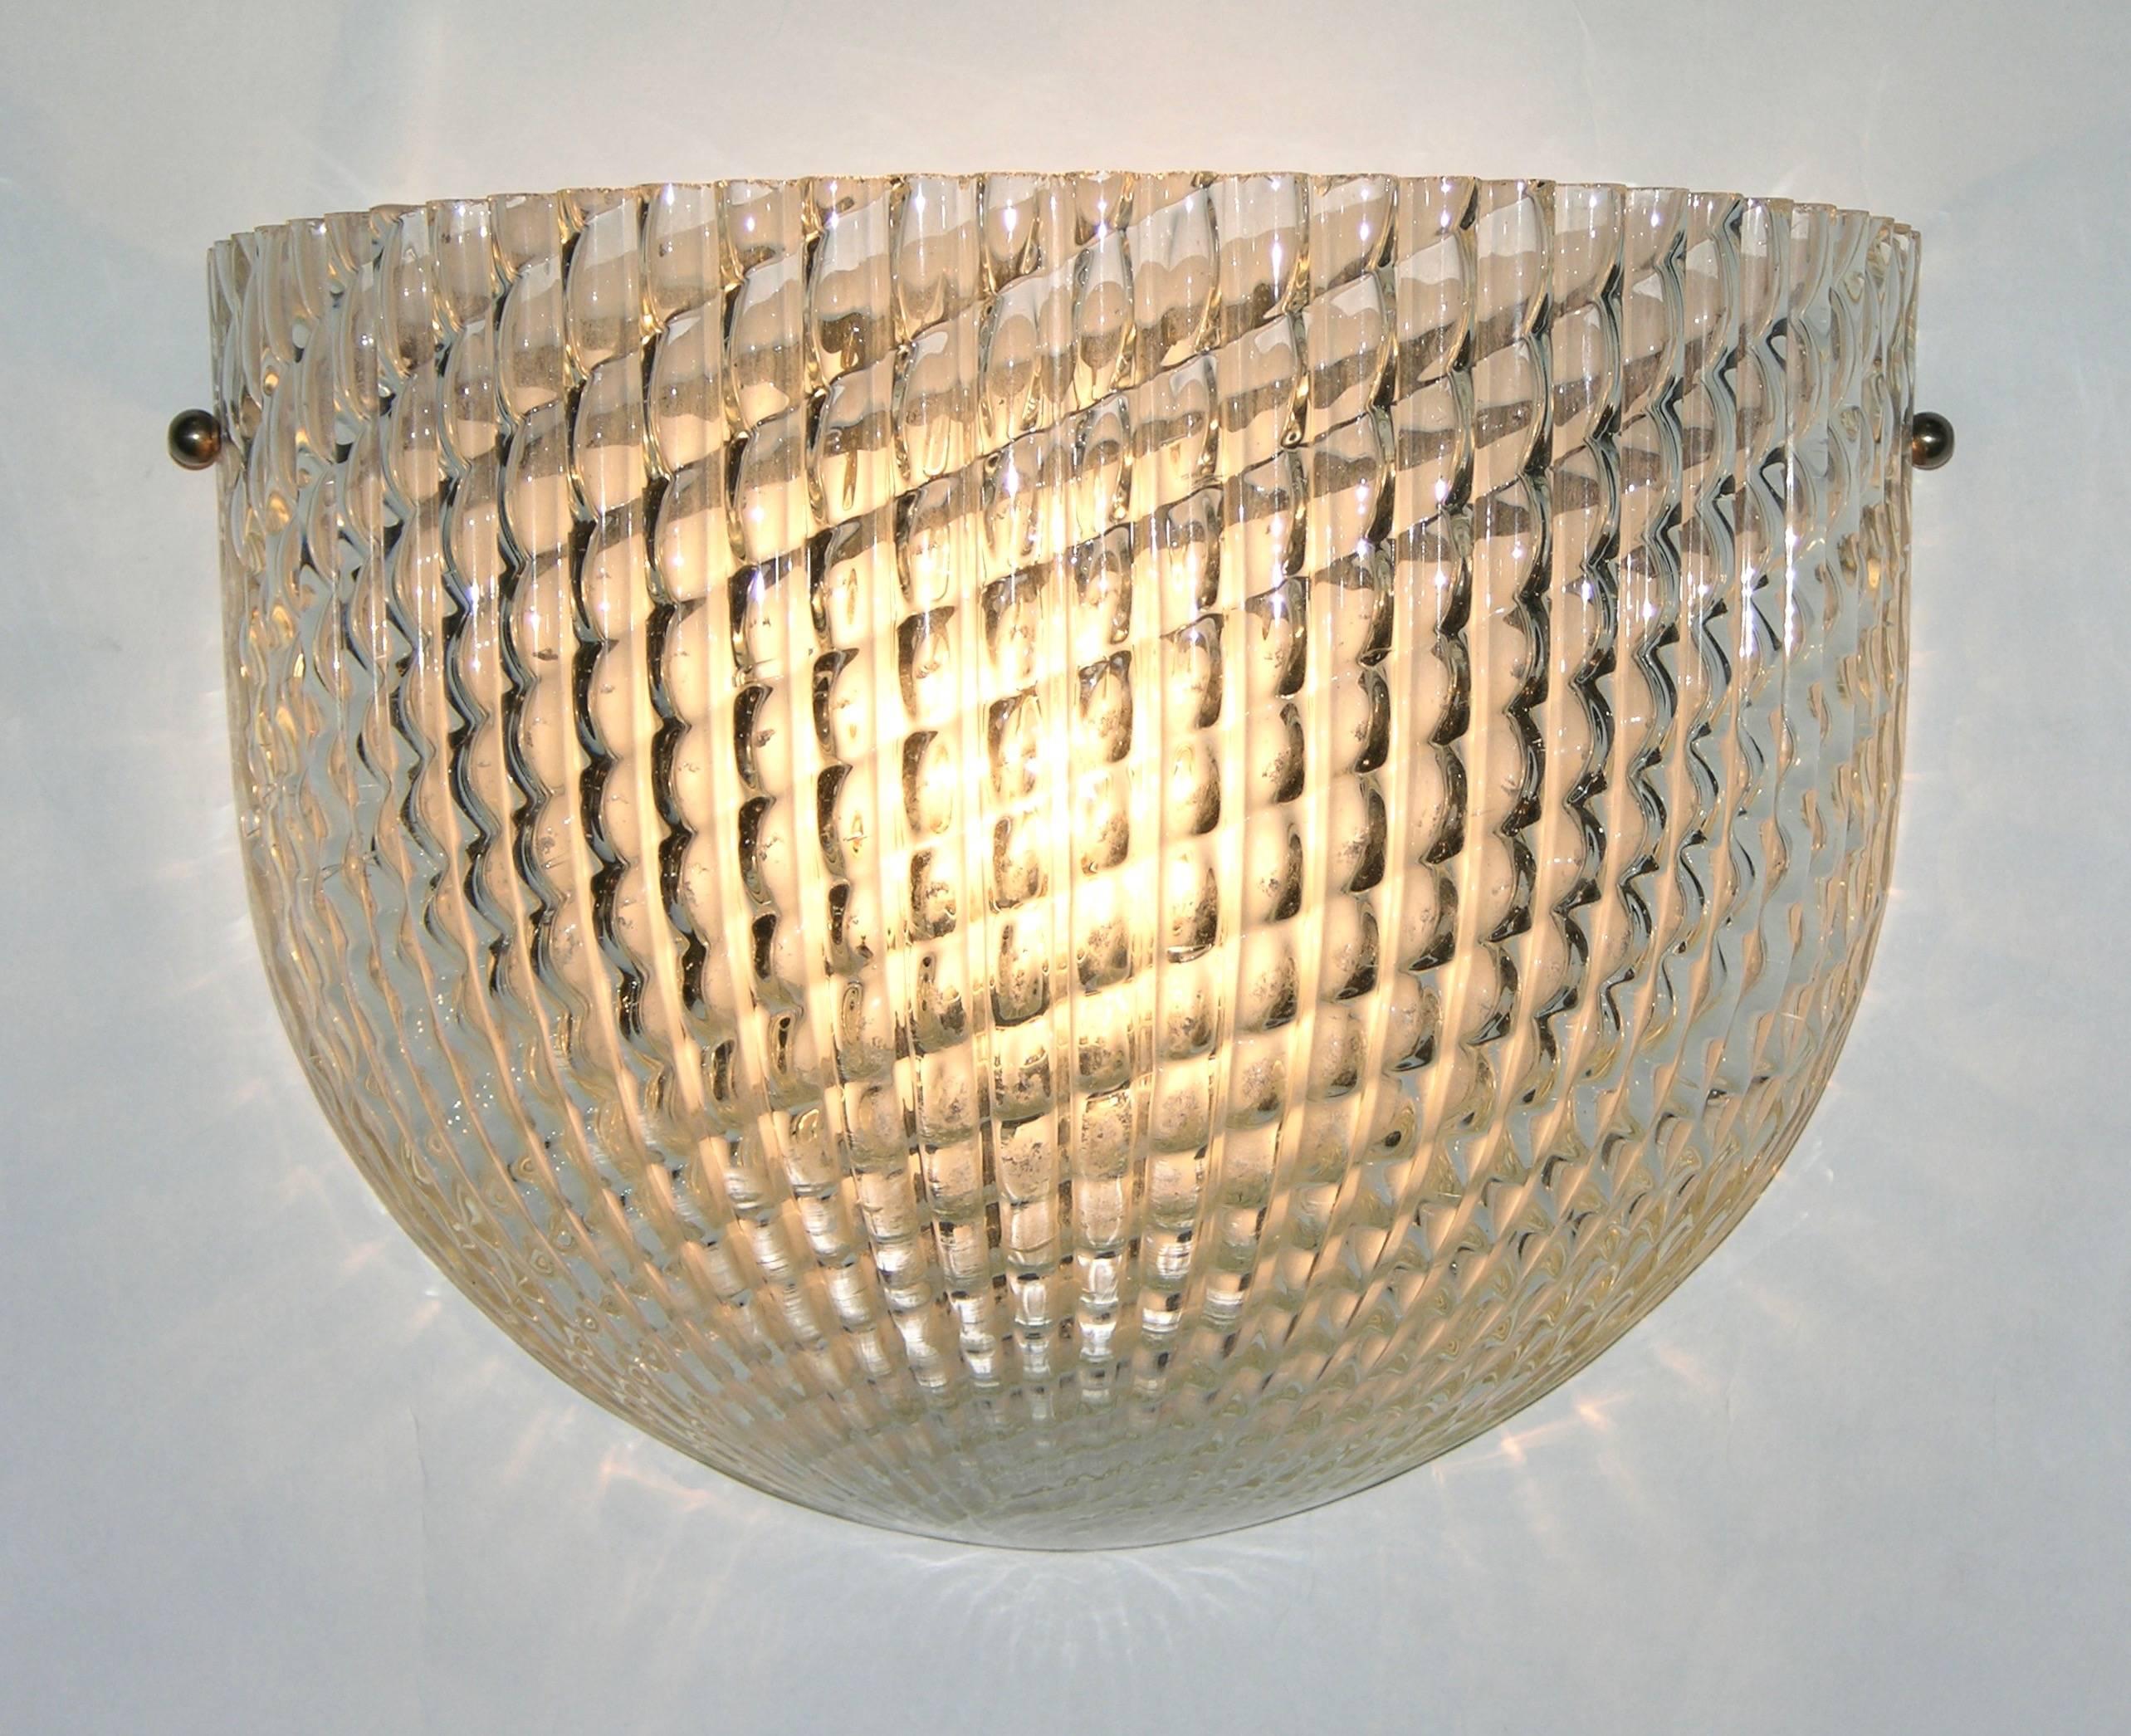 Elegant Italian Art Deco wall light attributed to Barovier e Toso, the high quality crystal clear Murano glass is worked with the technique 